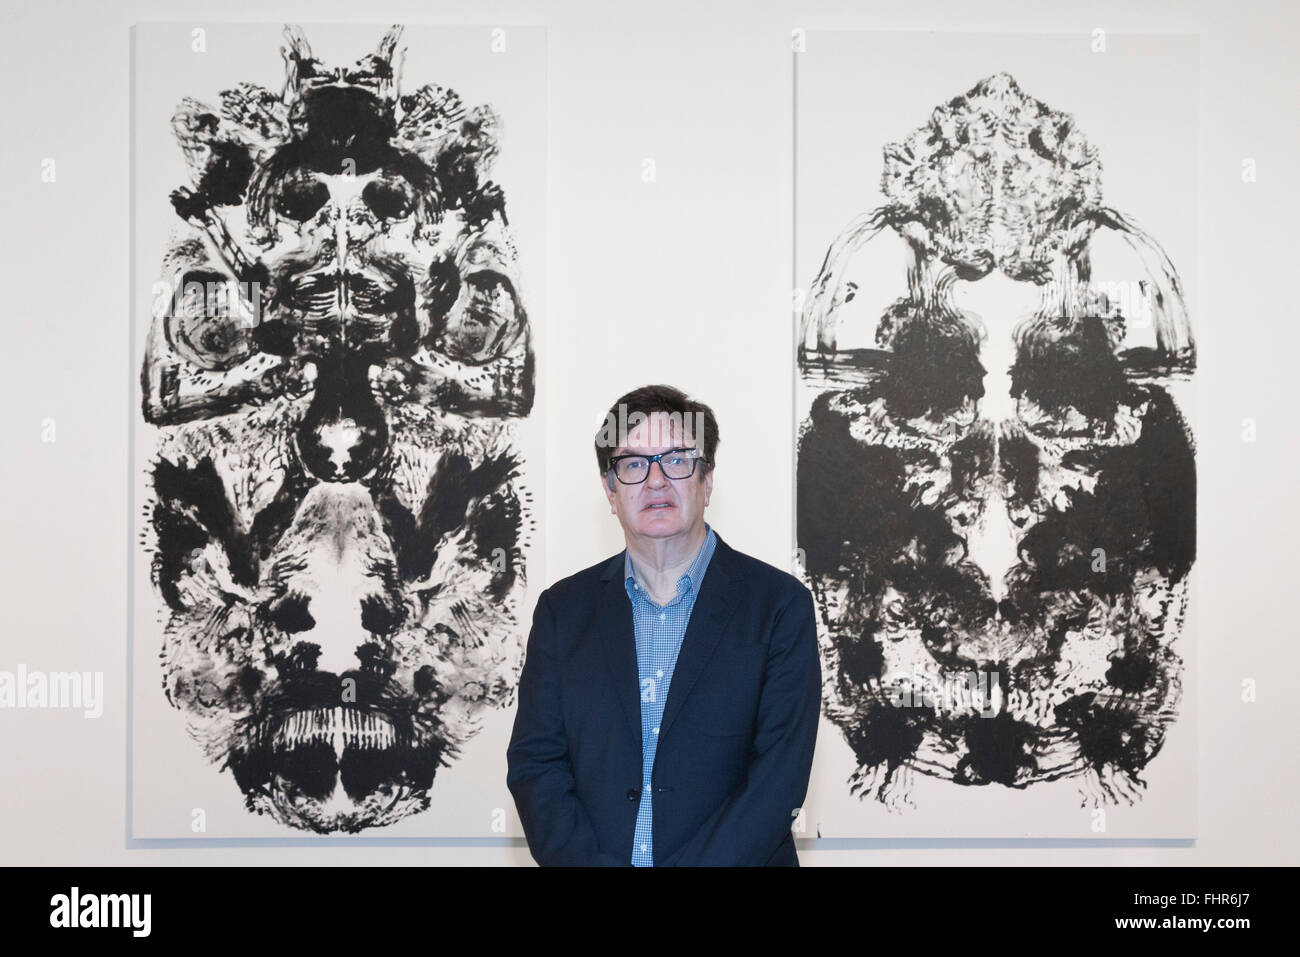 London, UK. 25 February 2016. Artist Mark Wallinger poses in front of his ID paintings. Hauser & Wirth gallery open a solo exhibition of new paintings and multi-media works by British artist Mark Wallinger. The exhibition, which takes up both spaces at Savile Row, runs from 26 February to 7 May 2016. Stock Photo